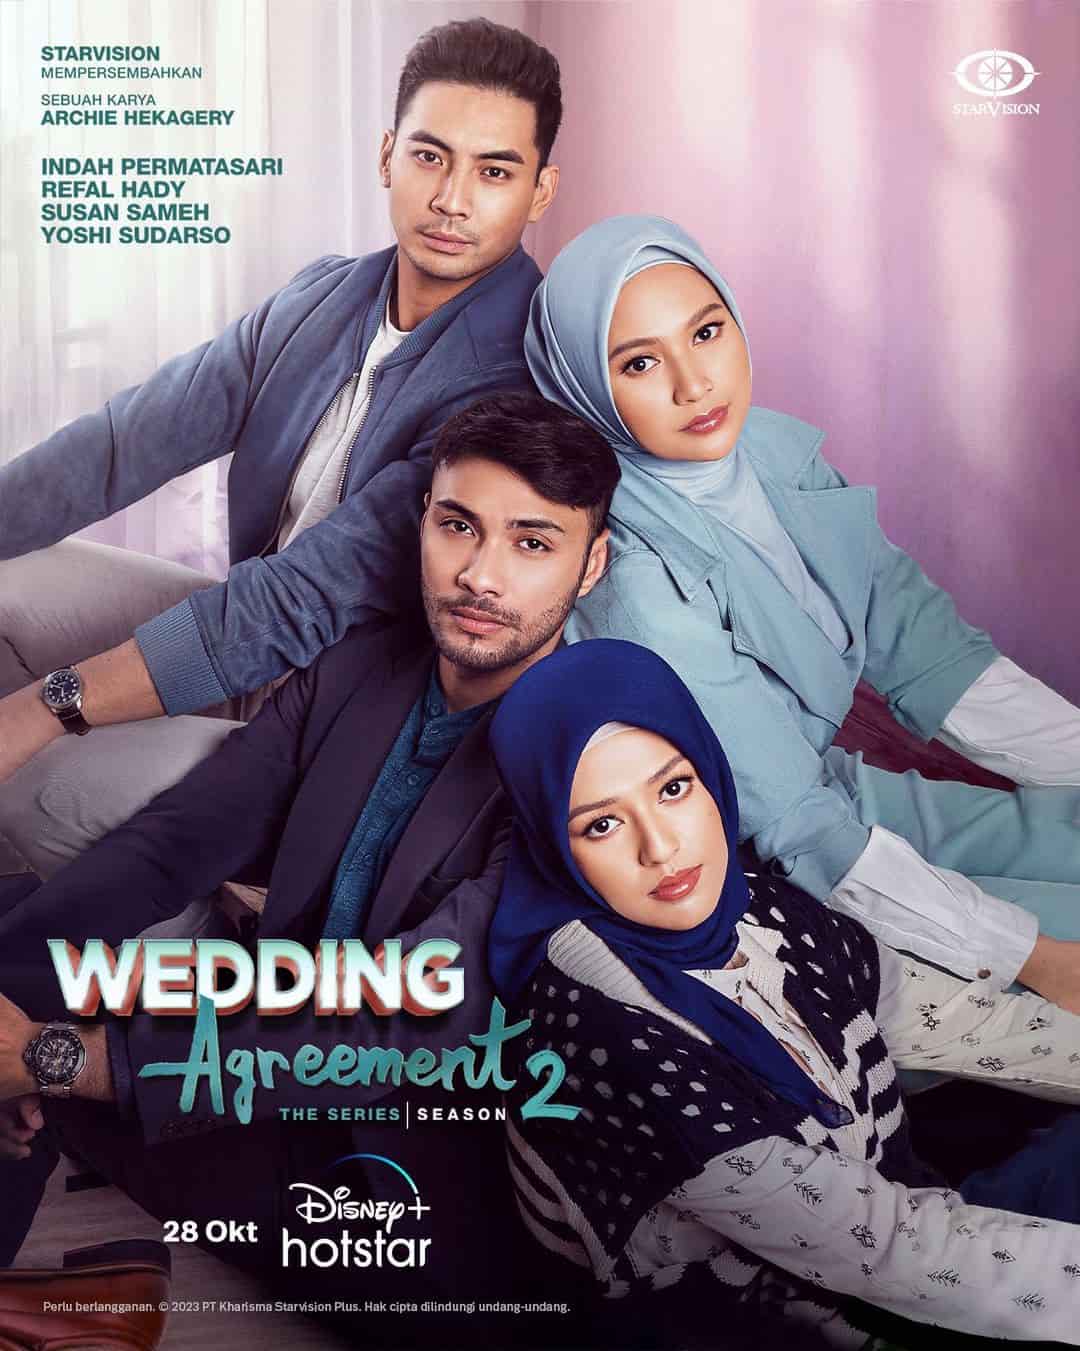 Wedding Agreement the Series 2 - Sinopsis, Pemain, OST, Episode, Review